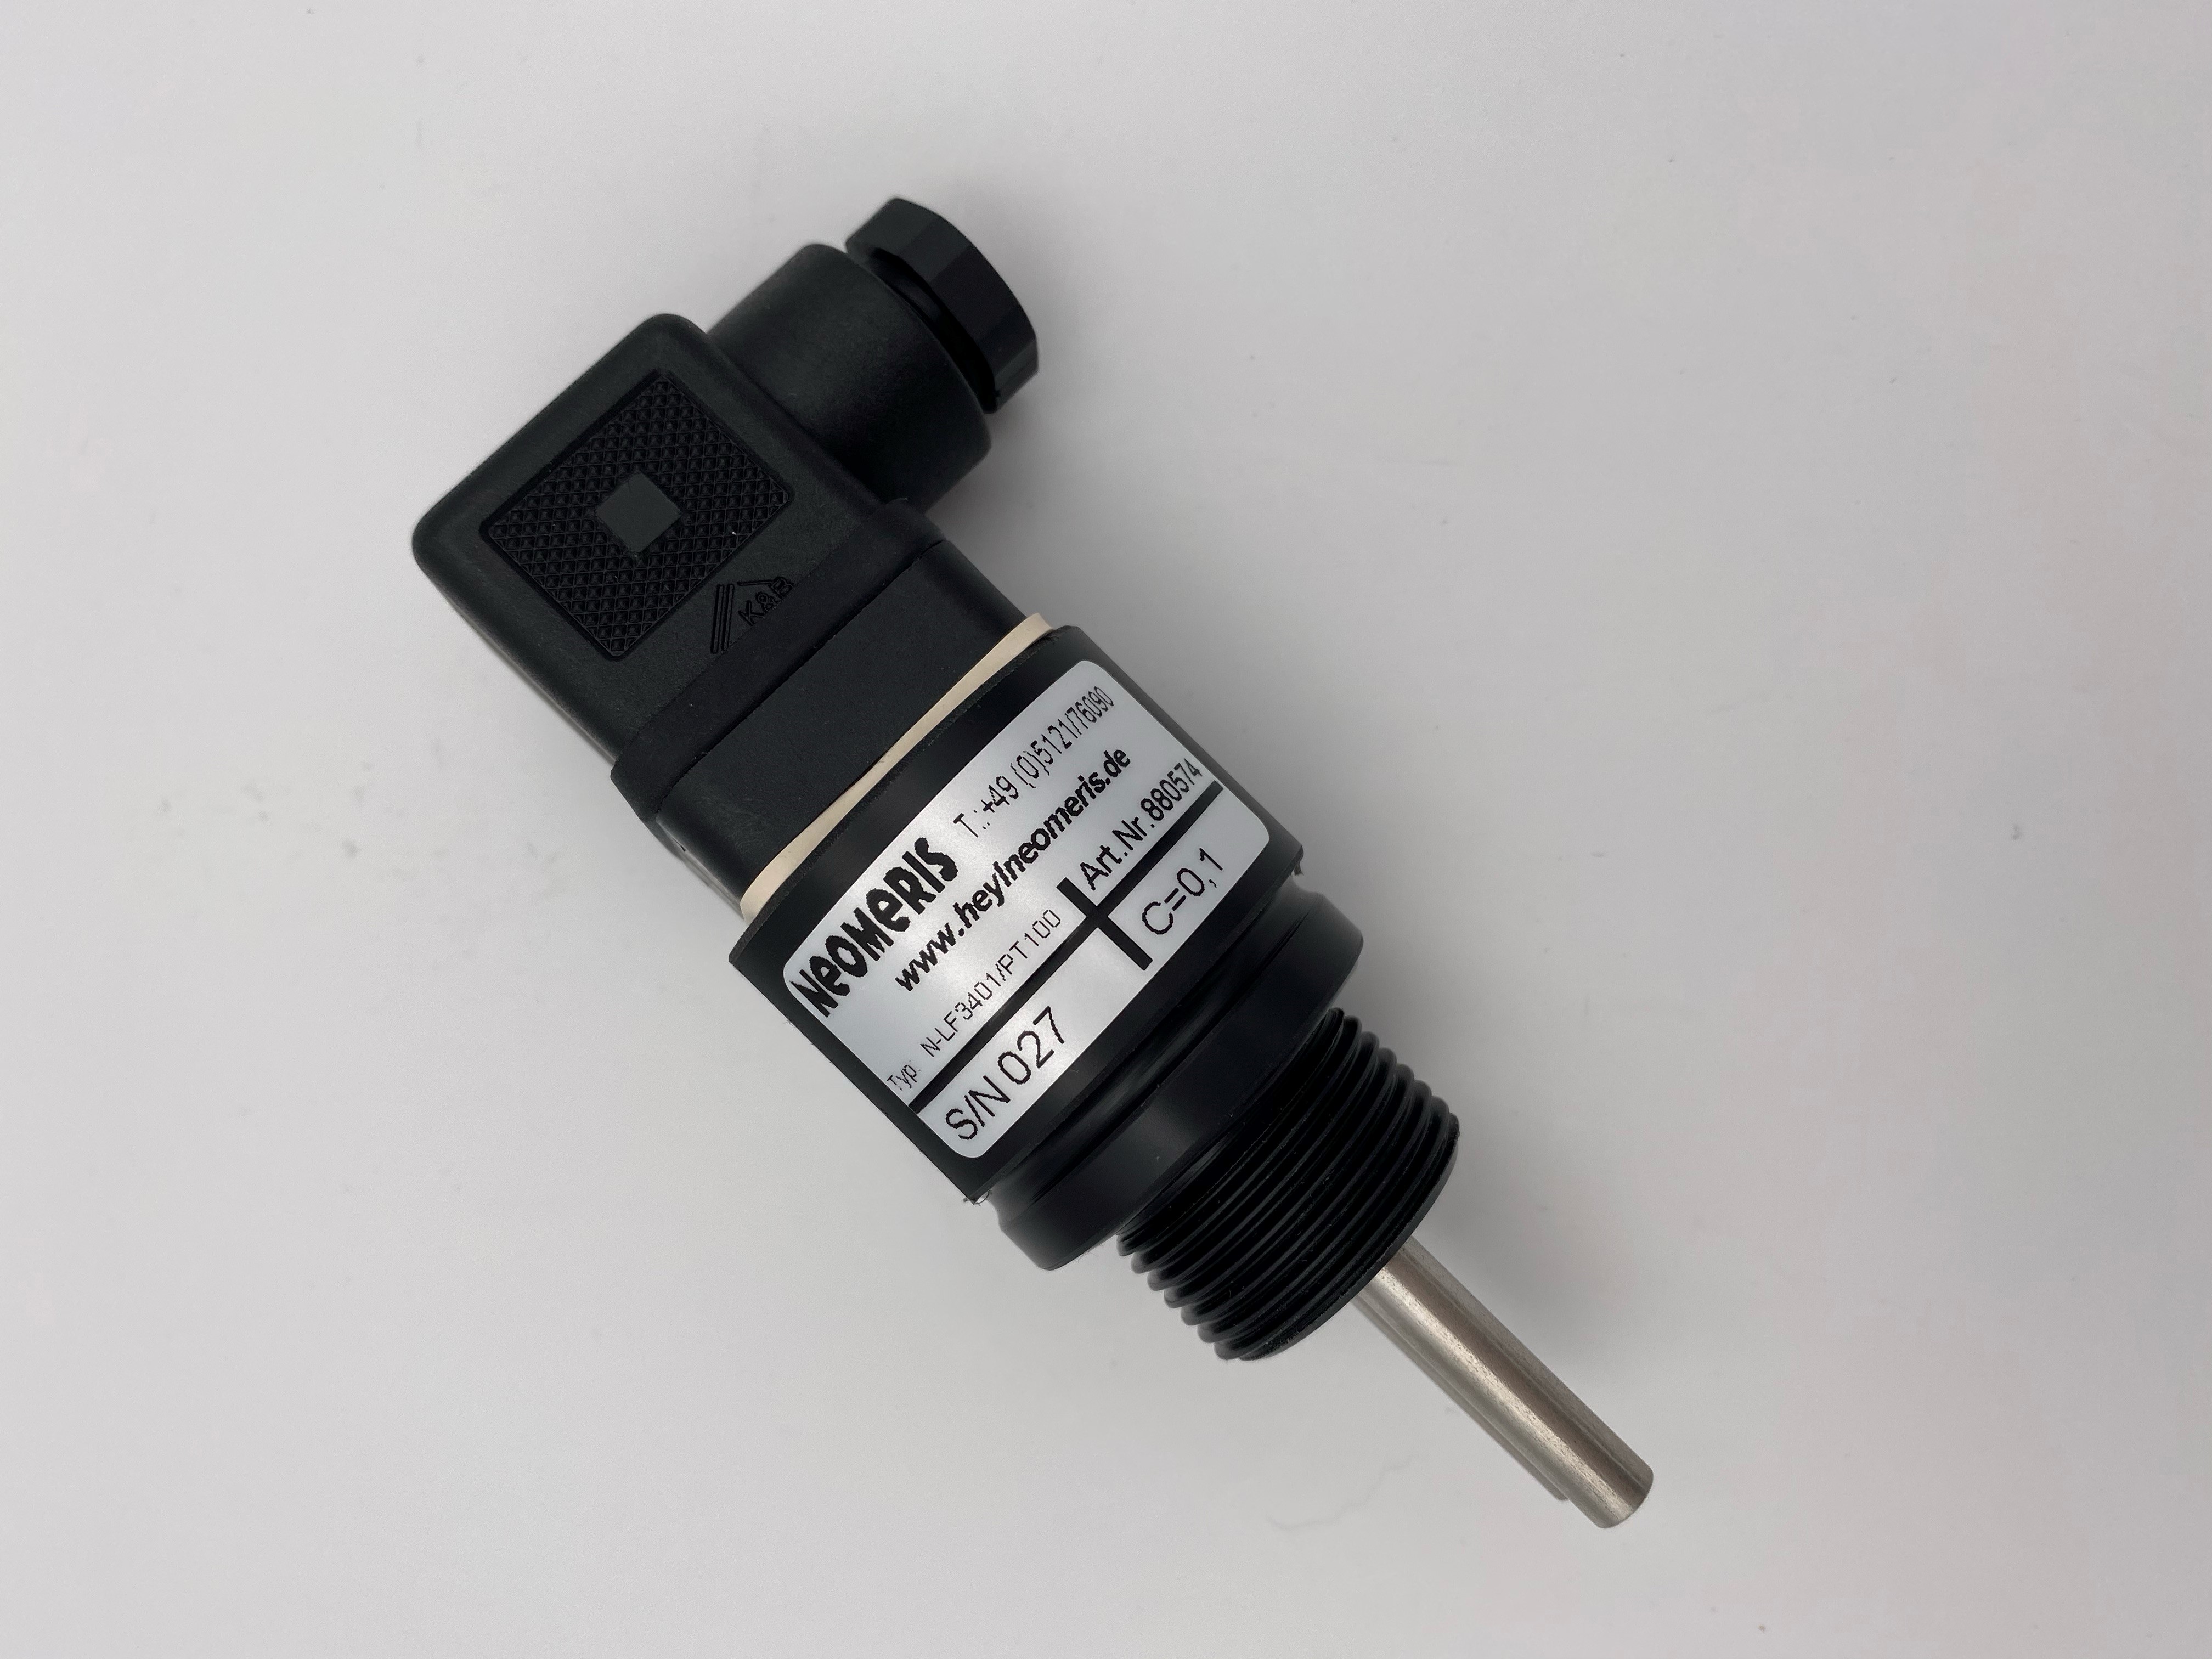 N-LF3401 conductivity measuring cell with PT100, screw-in cell and solenoid valve connector